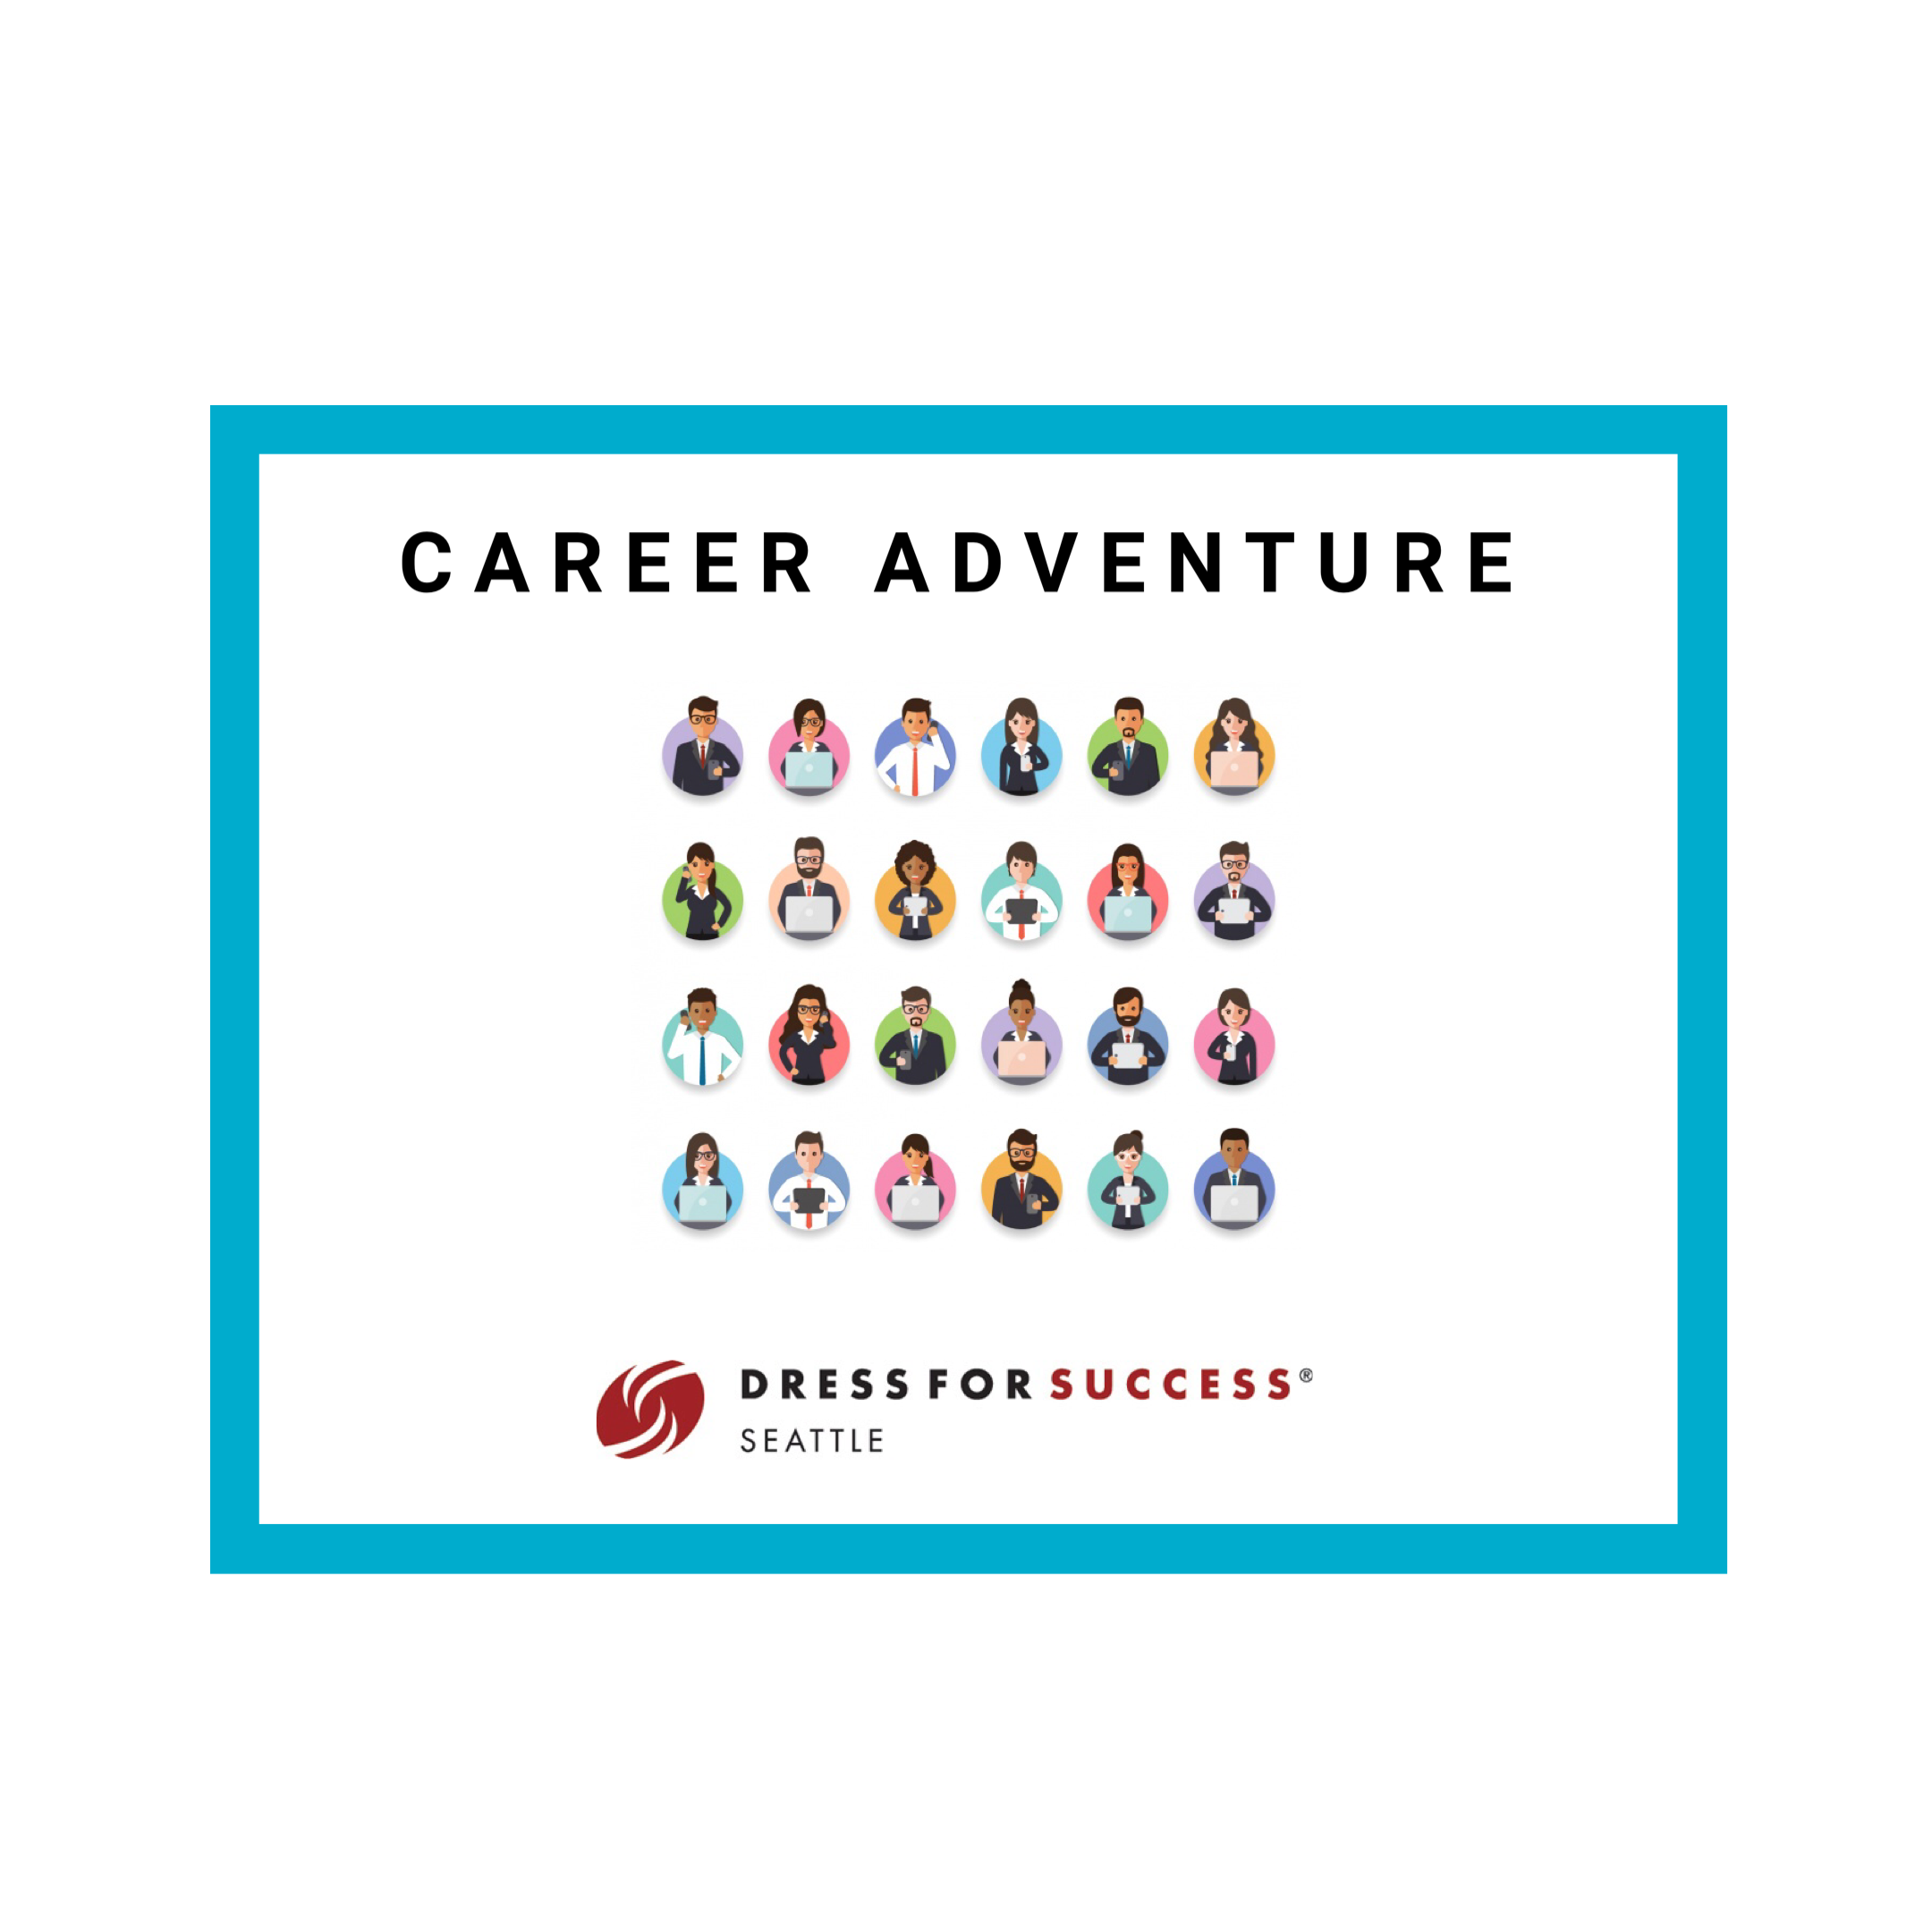 Career adventure image with I drawing illustrations of different career types